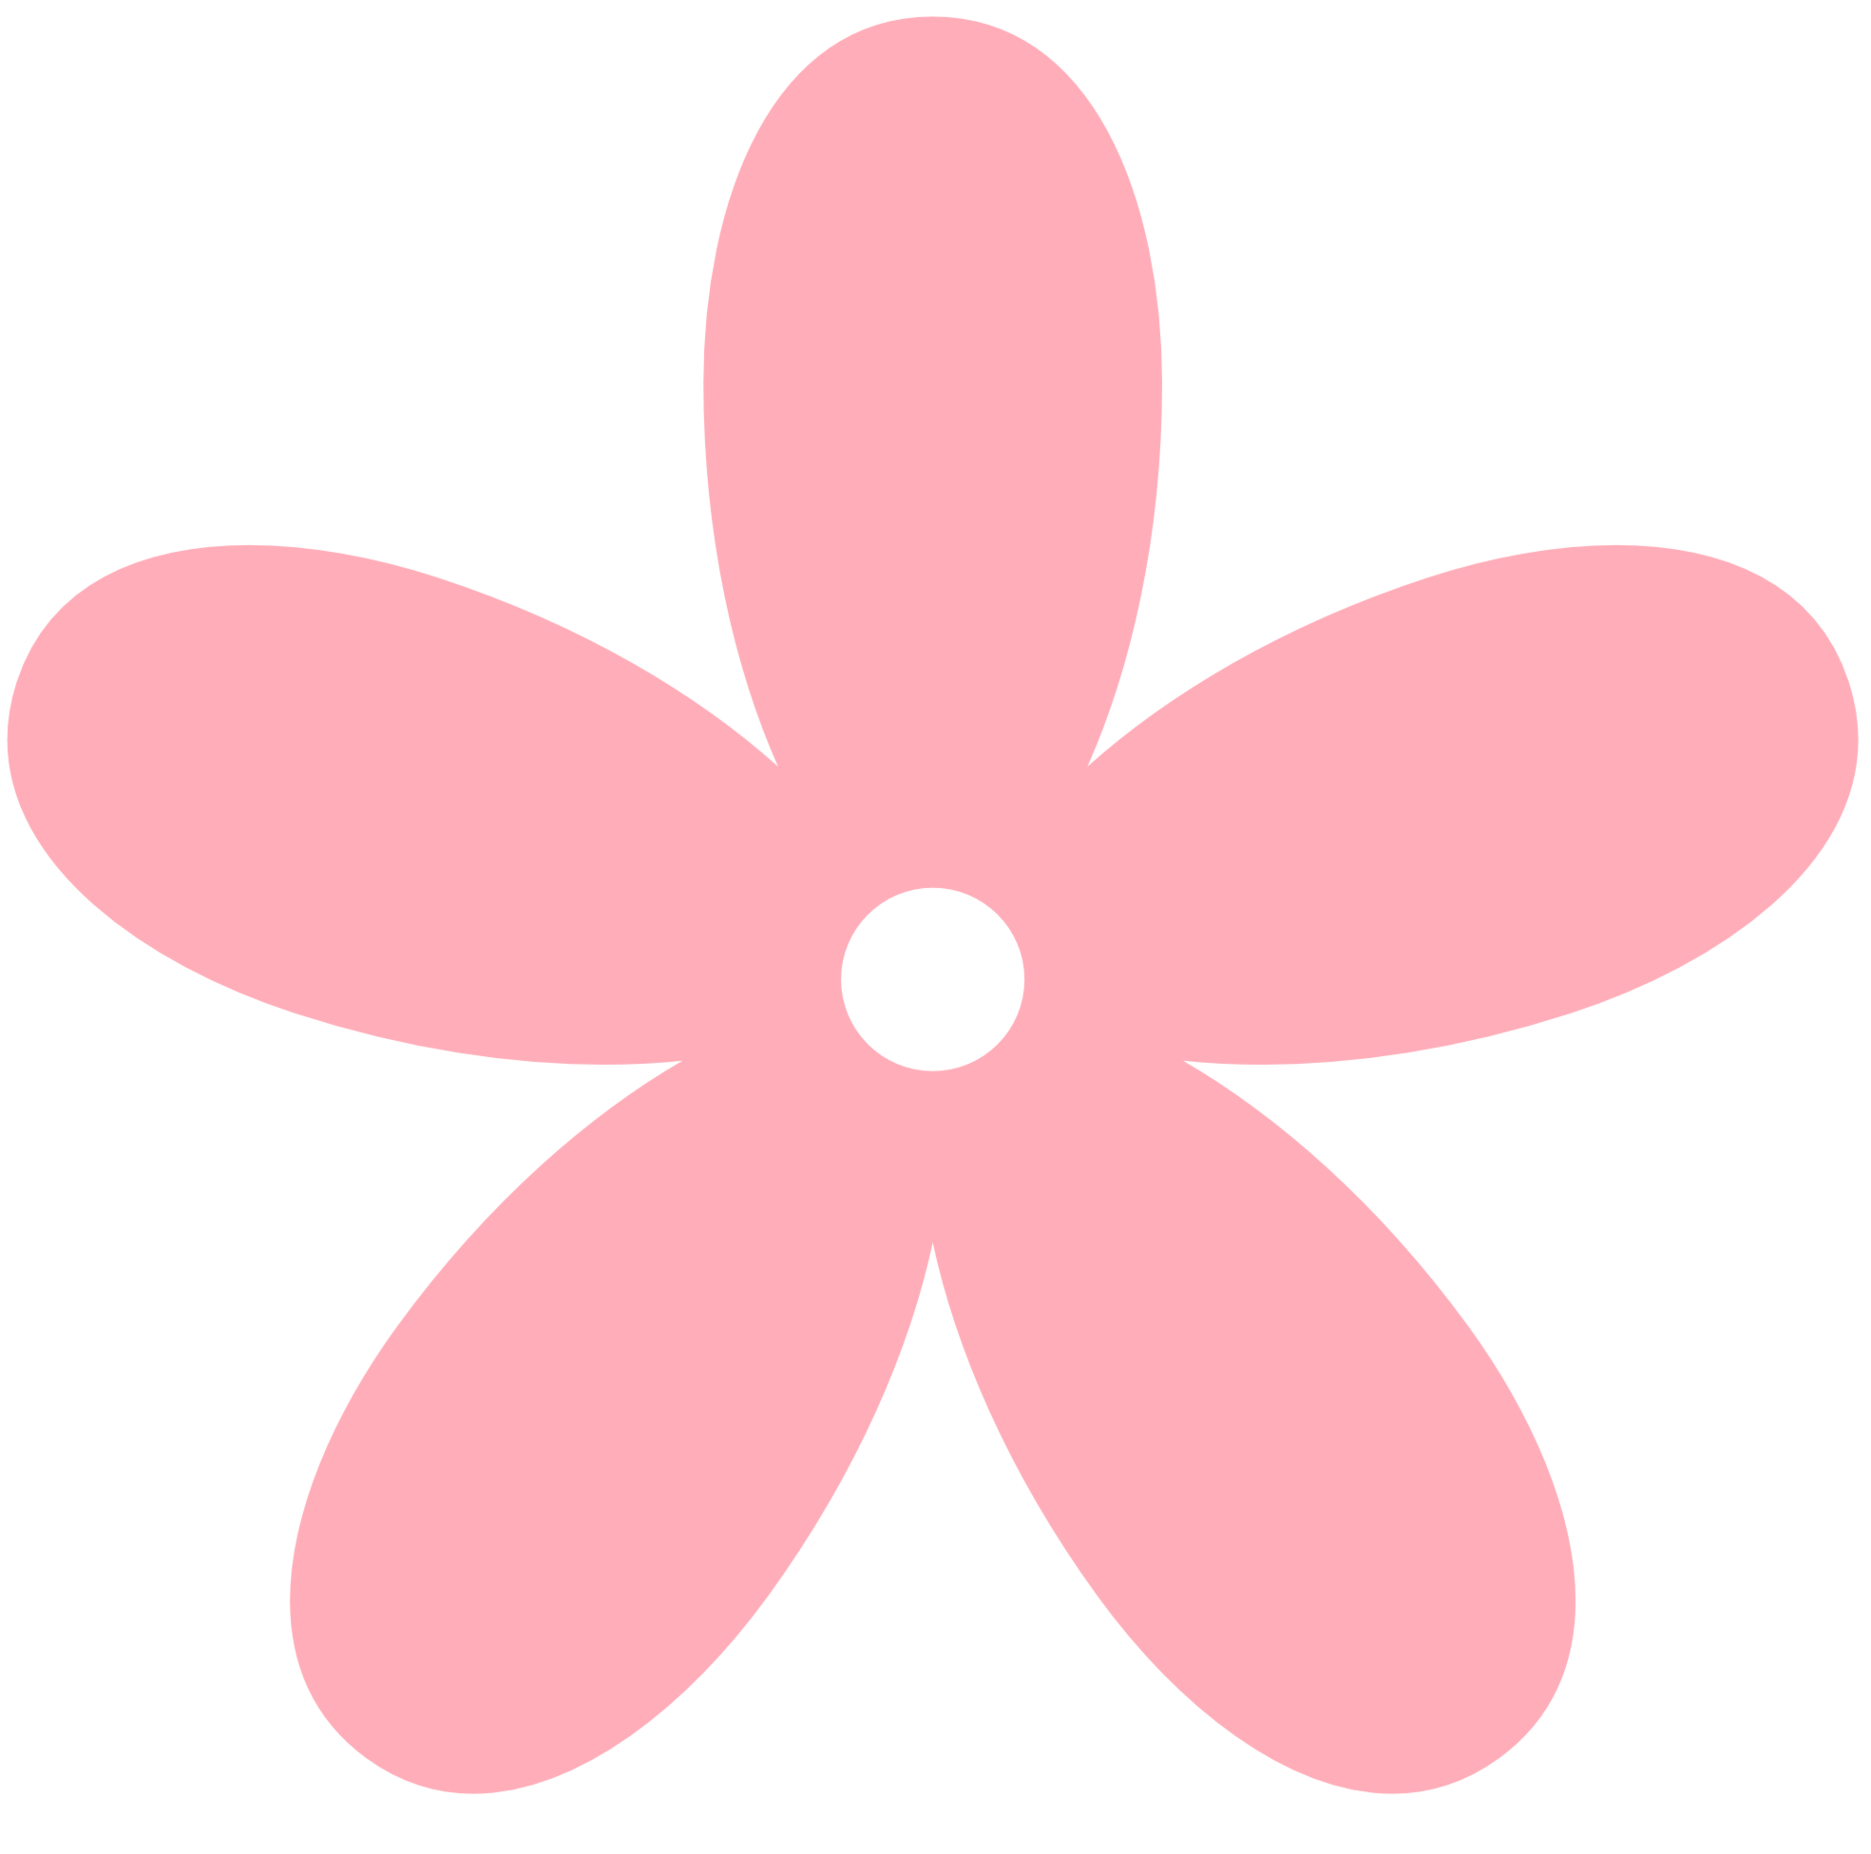 Pink Flowers Cartoon Clipart - Free to use Clip Art Resource